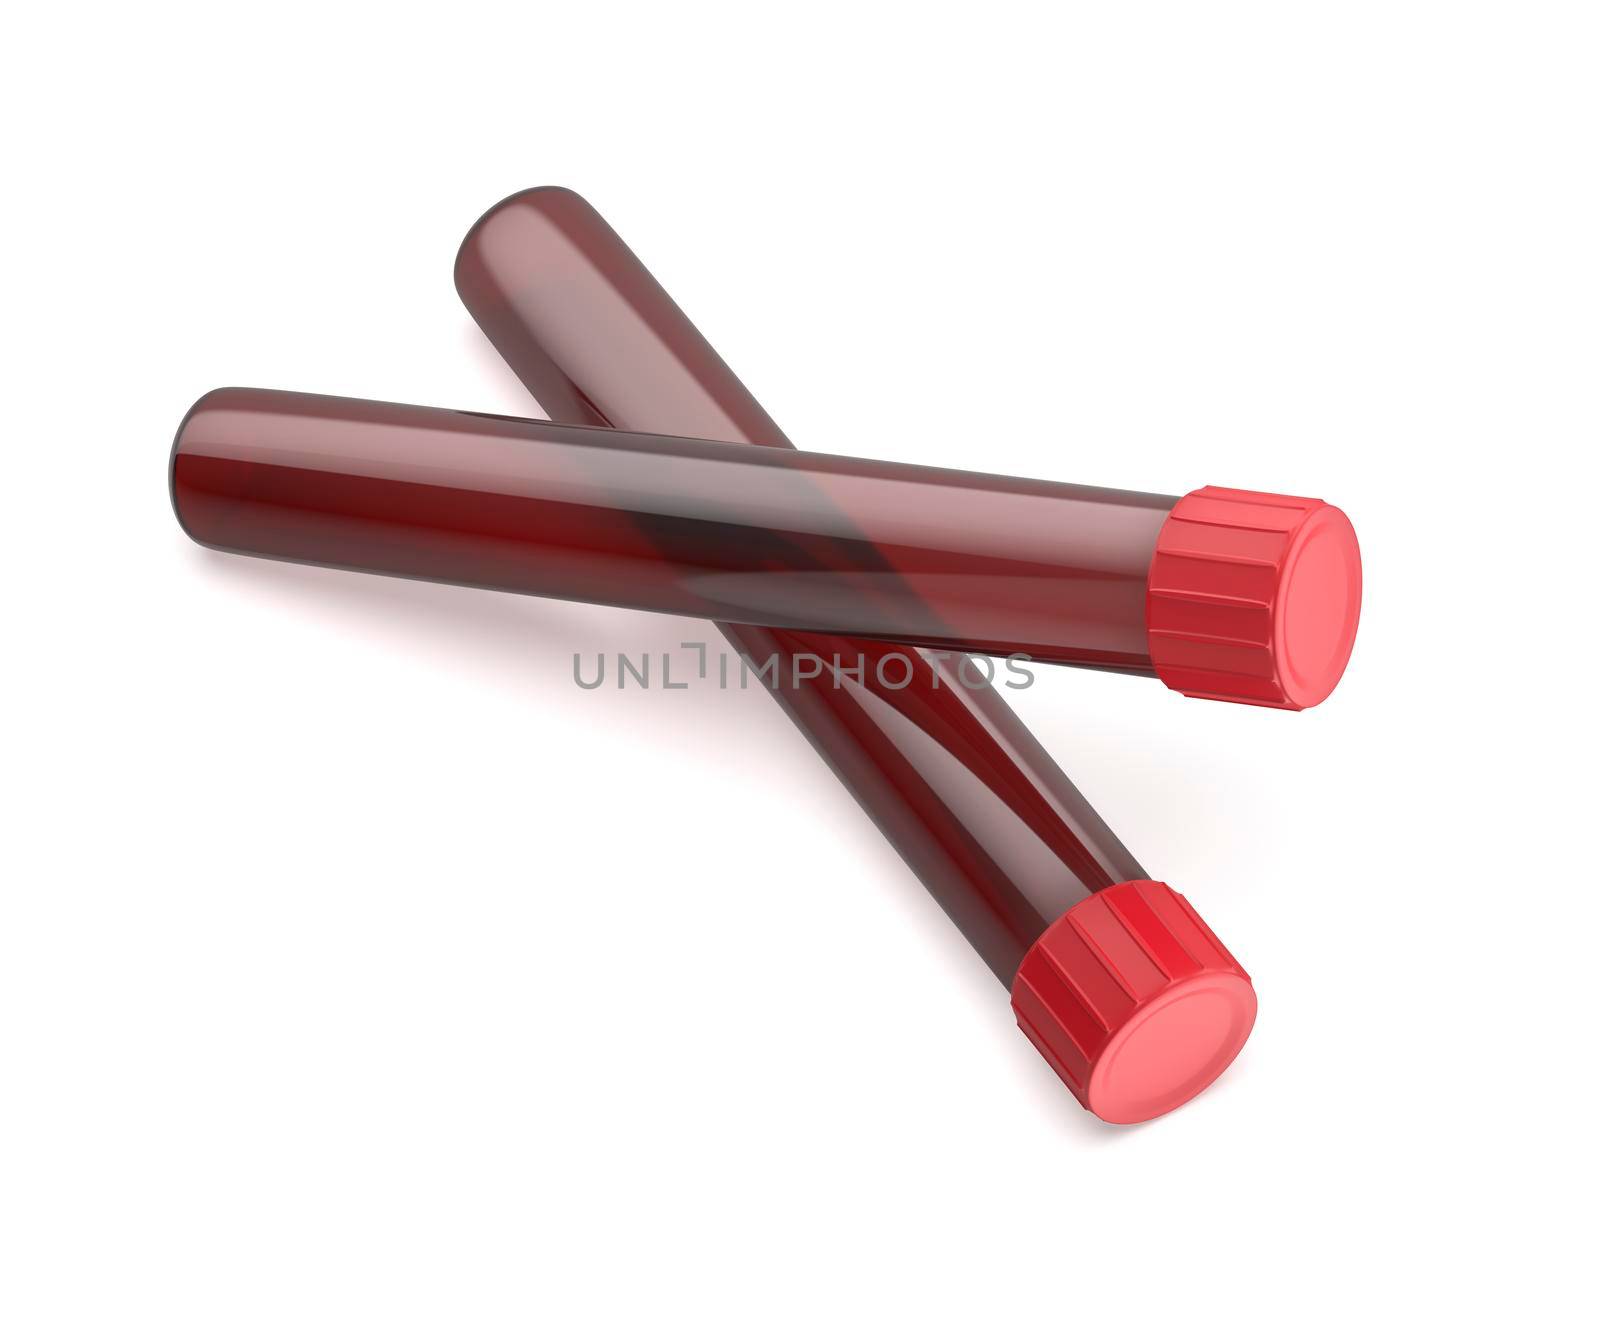 Test tubes with blood on white background